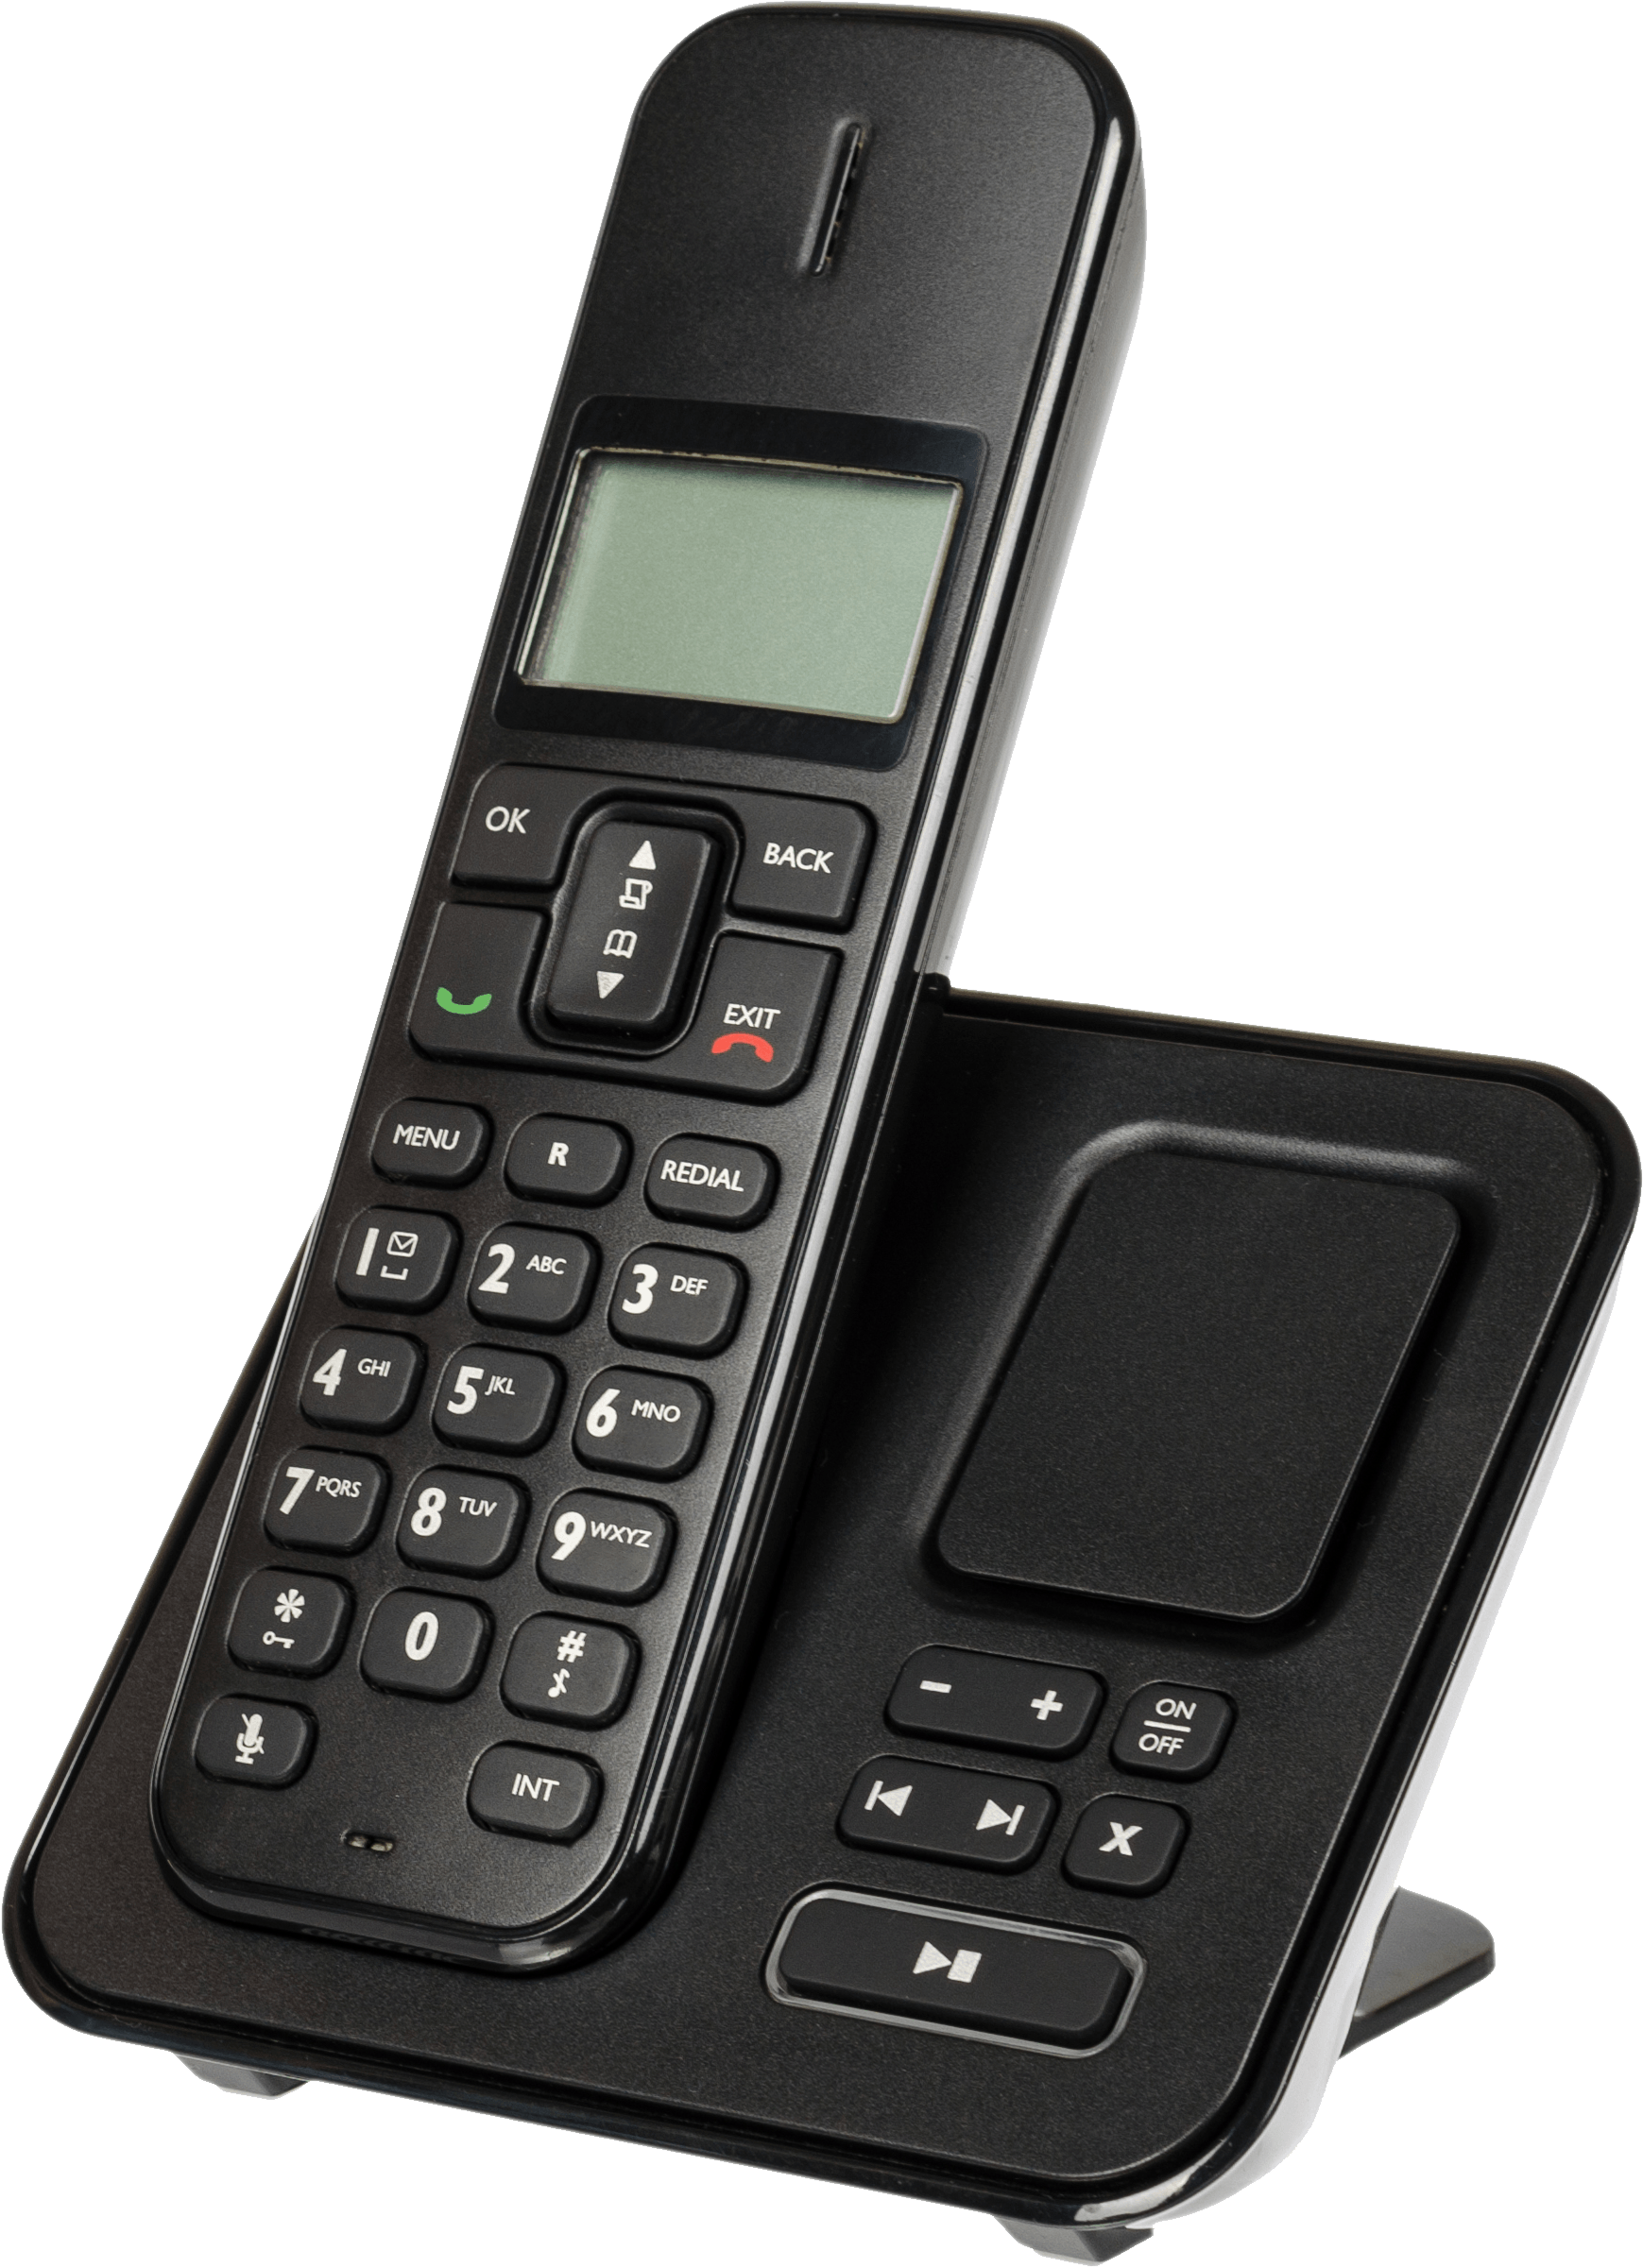 A black cordless phone with a display on it